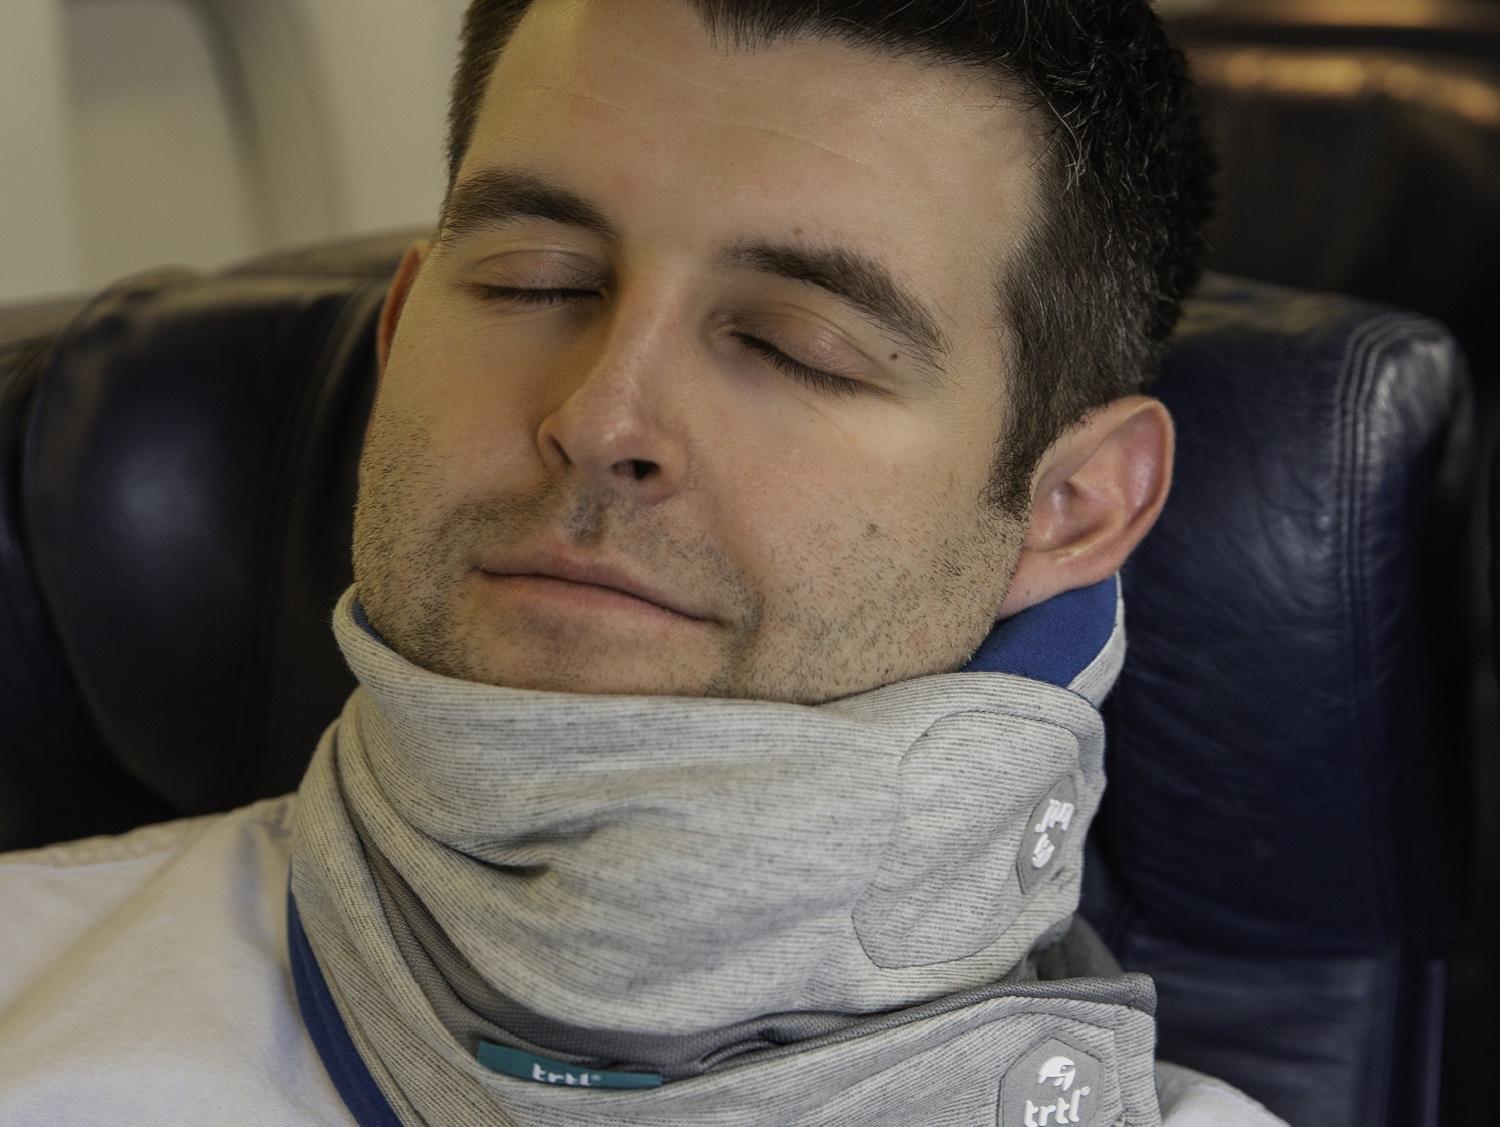 Shares on Facebook have given Michael Corrigan’s travel pillow firm a major boost